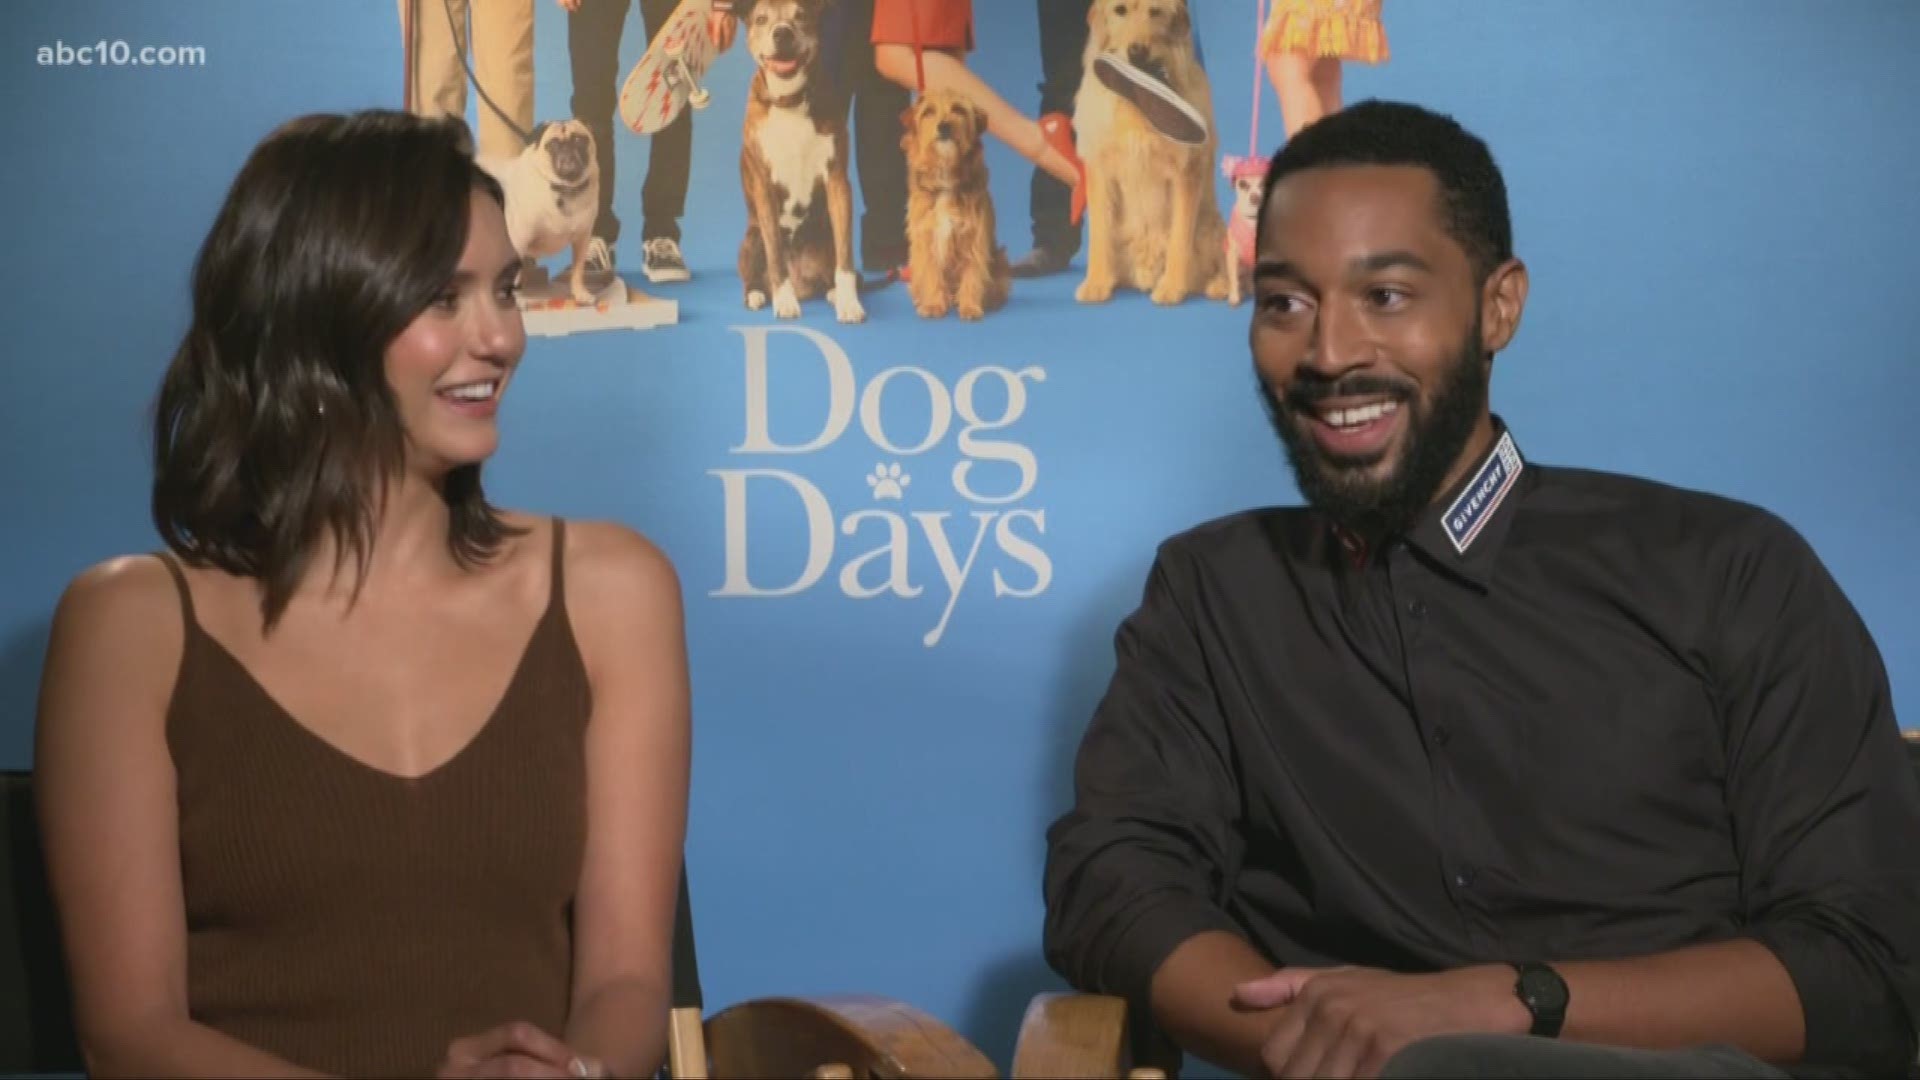 Mark S. Allen sits down with Nina Dobrev and Tone Bell to talk their new movie "Dog Days."